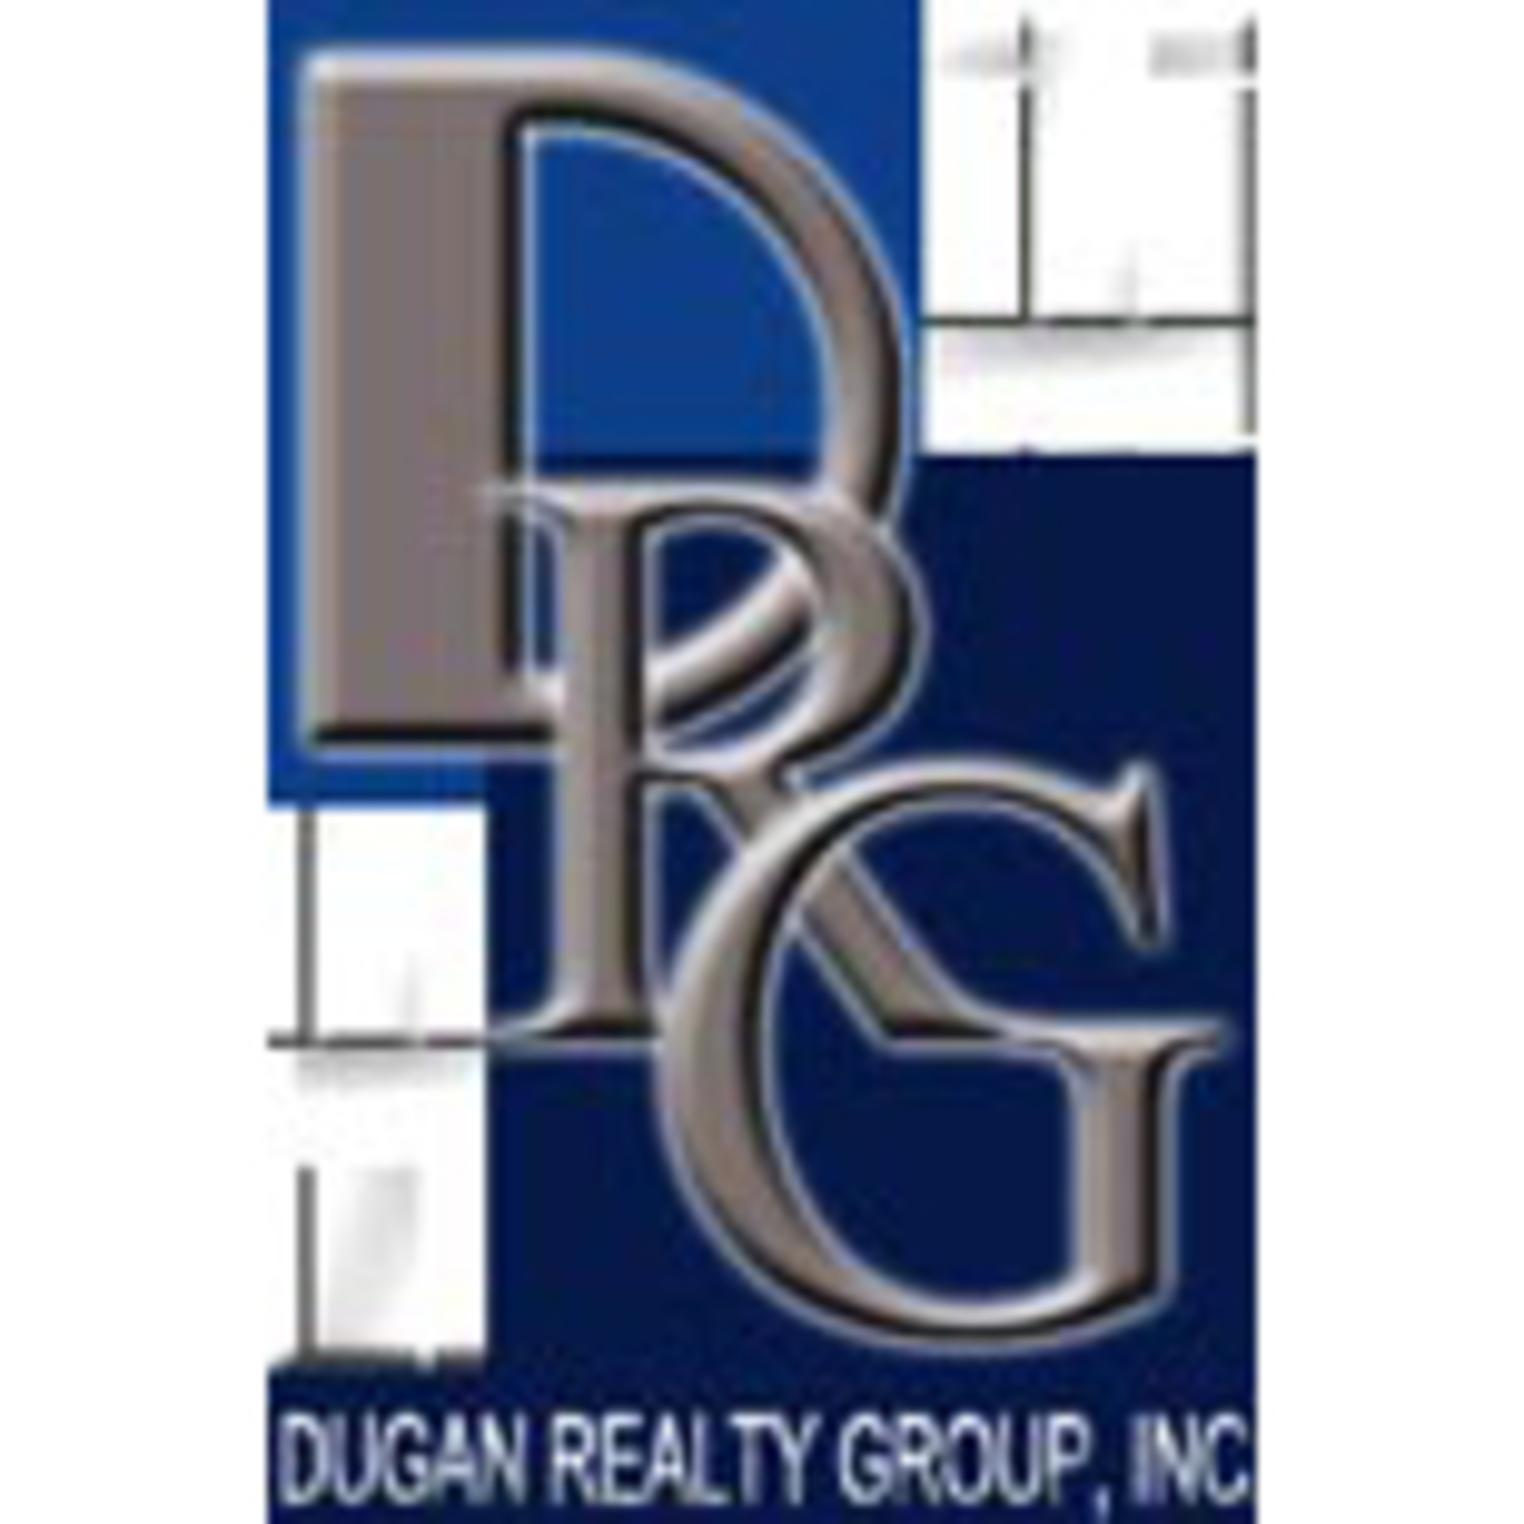 Dugan Realty Group & Appraisal Services